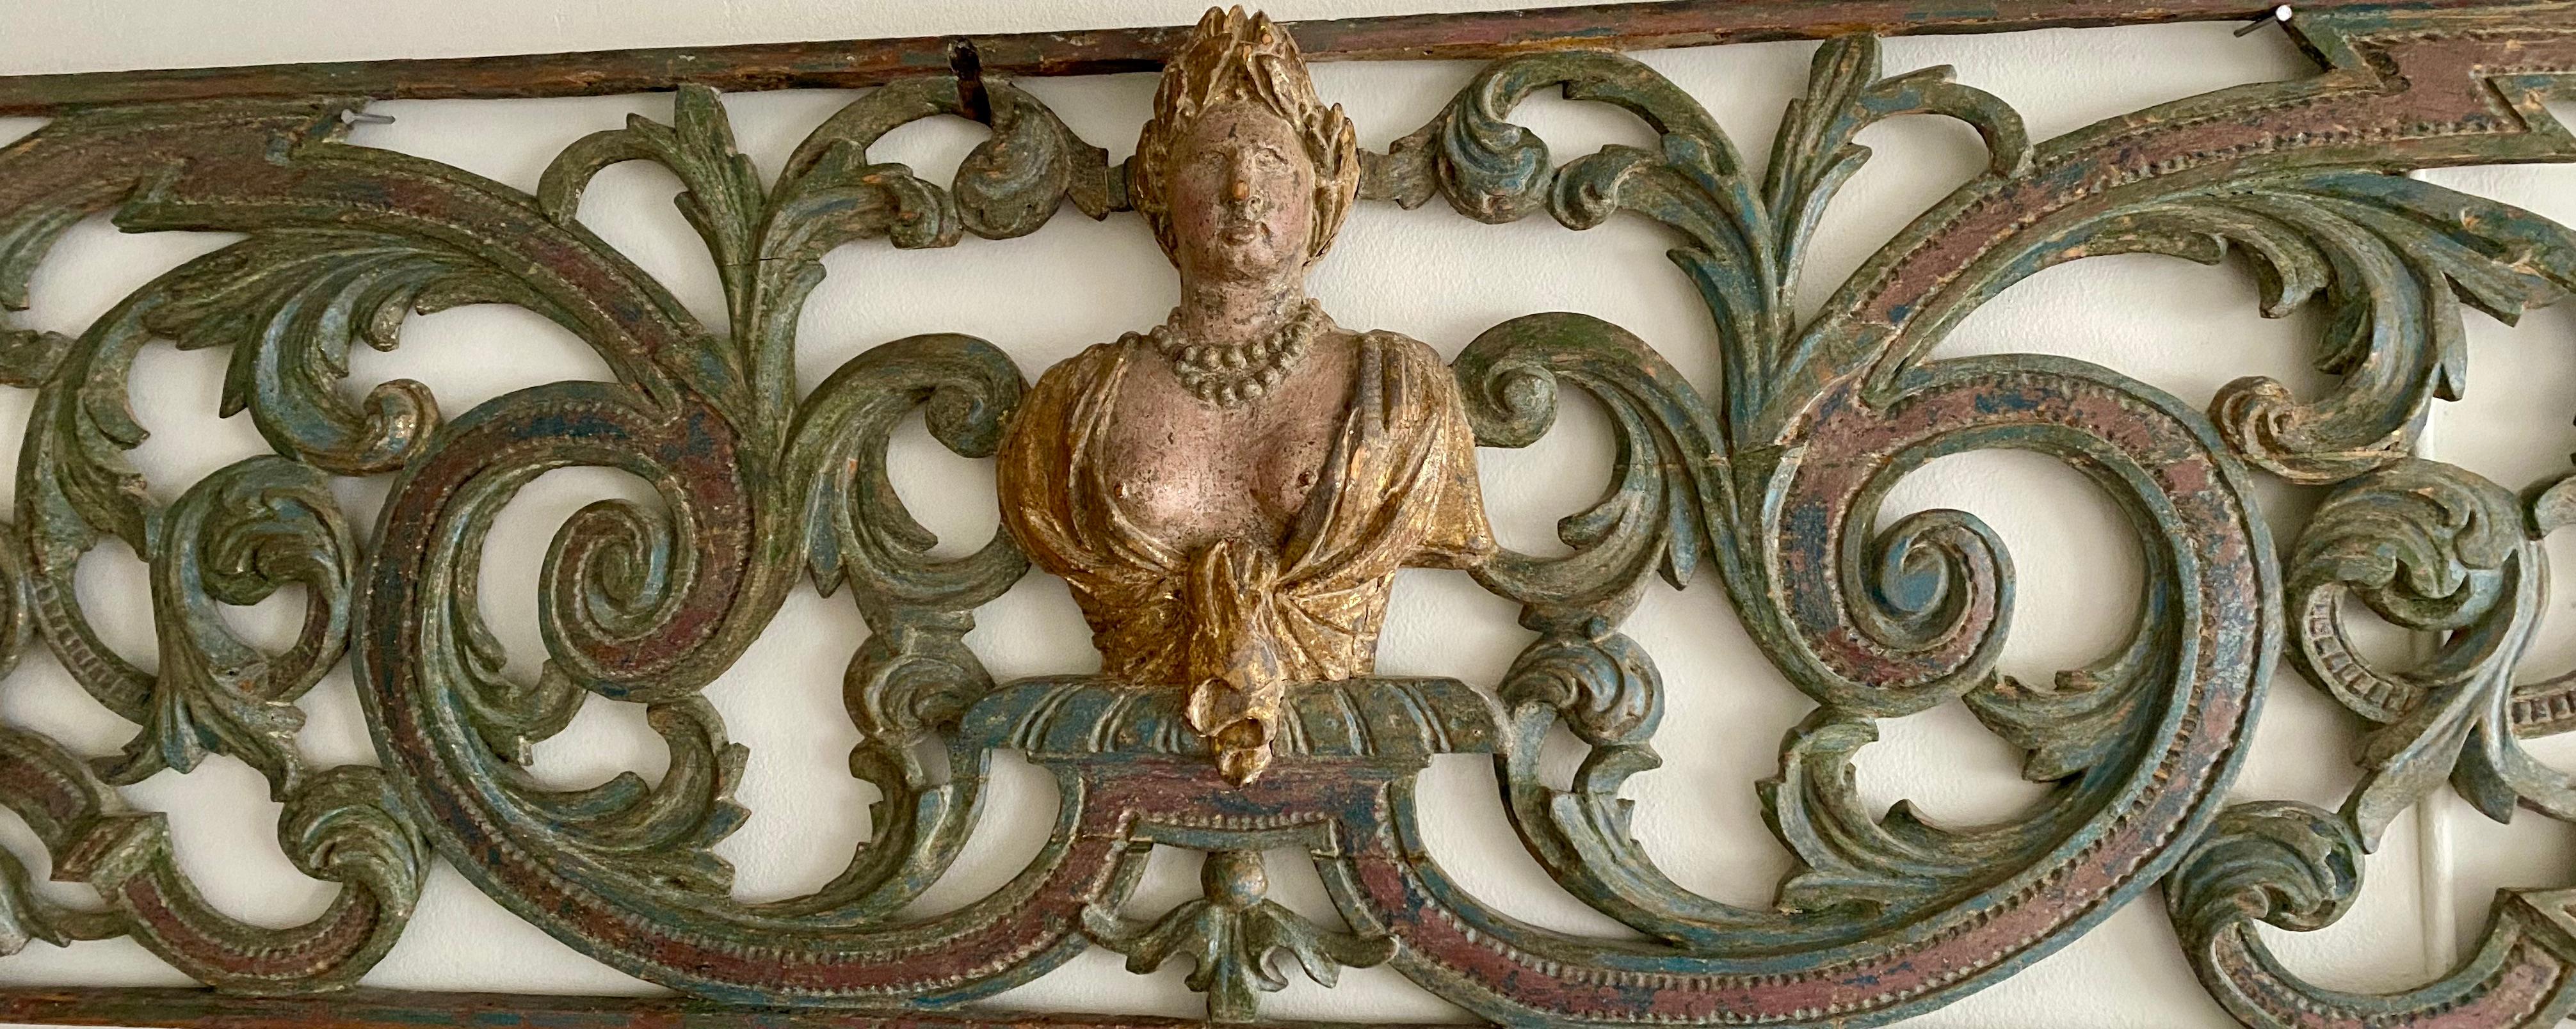 Hand-Carved Wood sculptured   Painted and gilt Overdoor Piece, Rococo, mid 18th Century